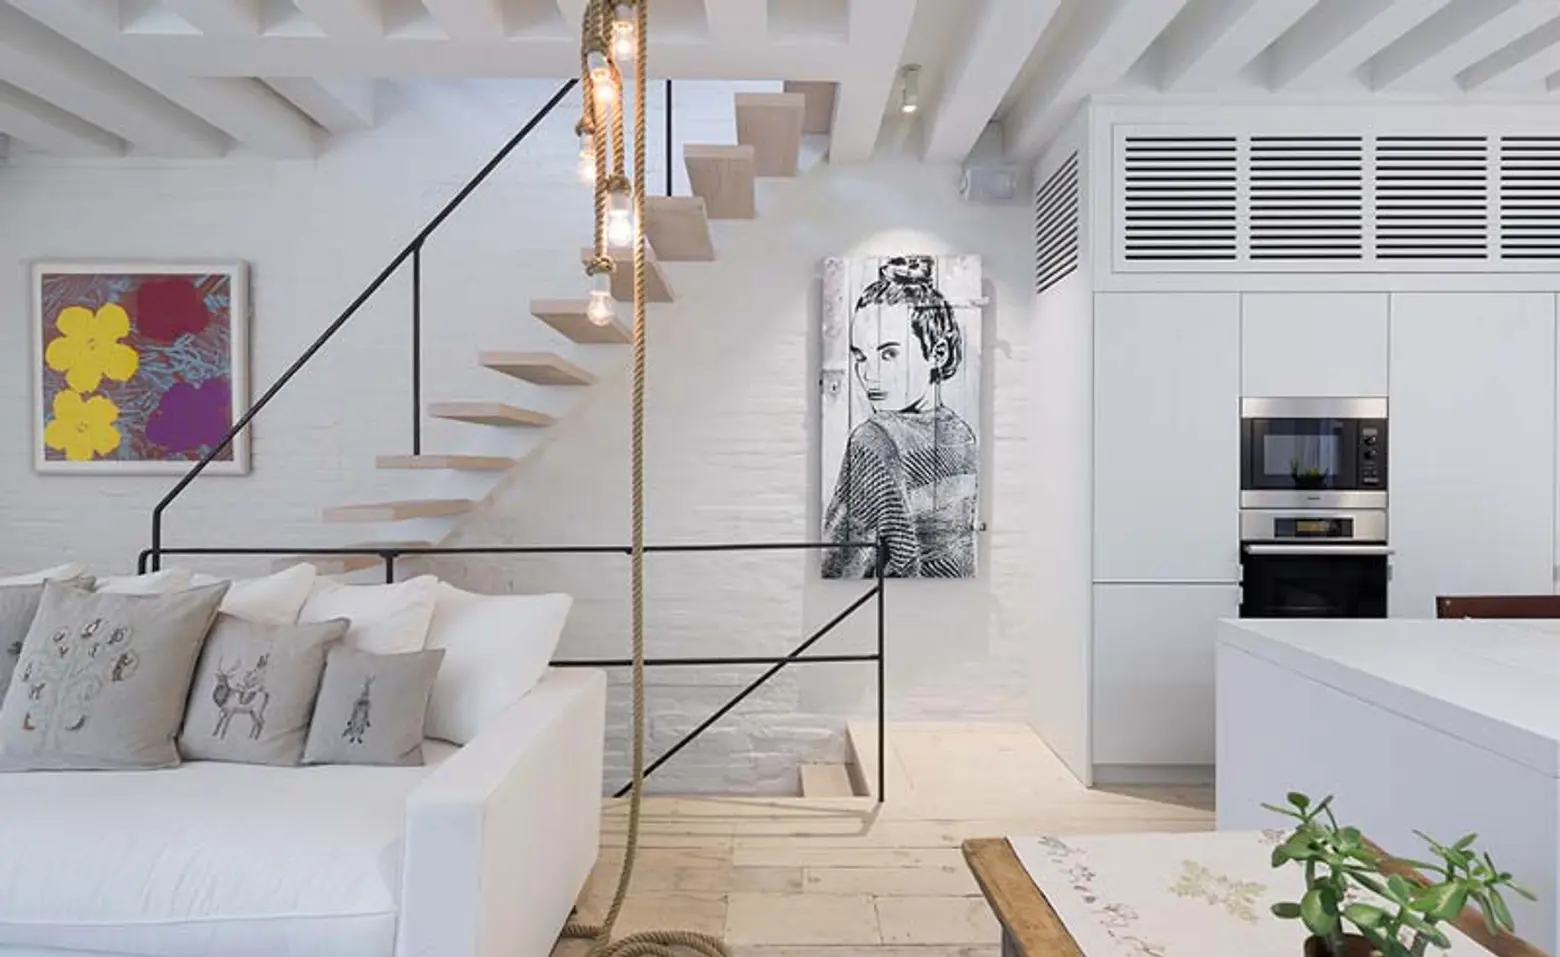 MAD-Designed West Village Duplex Gets a Modern Update with a Cantilevered Staircase